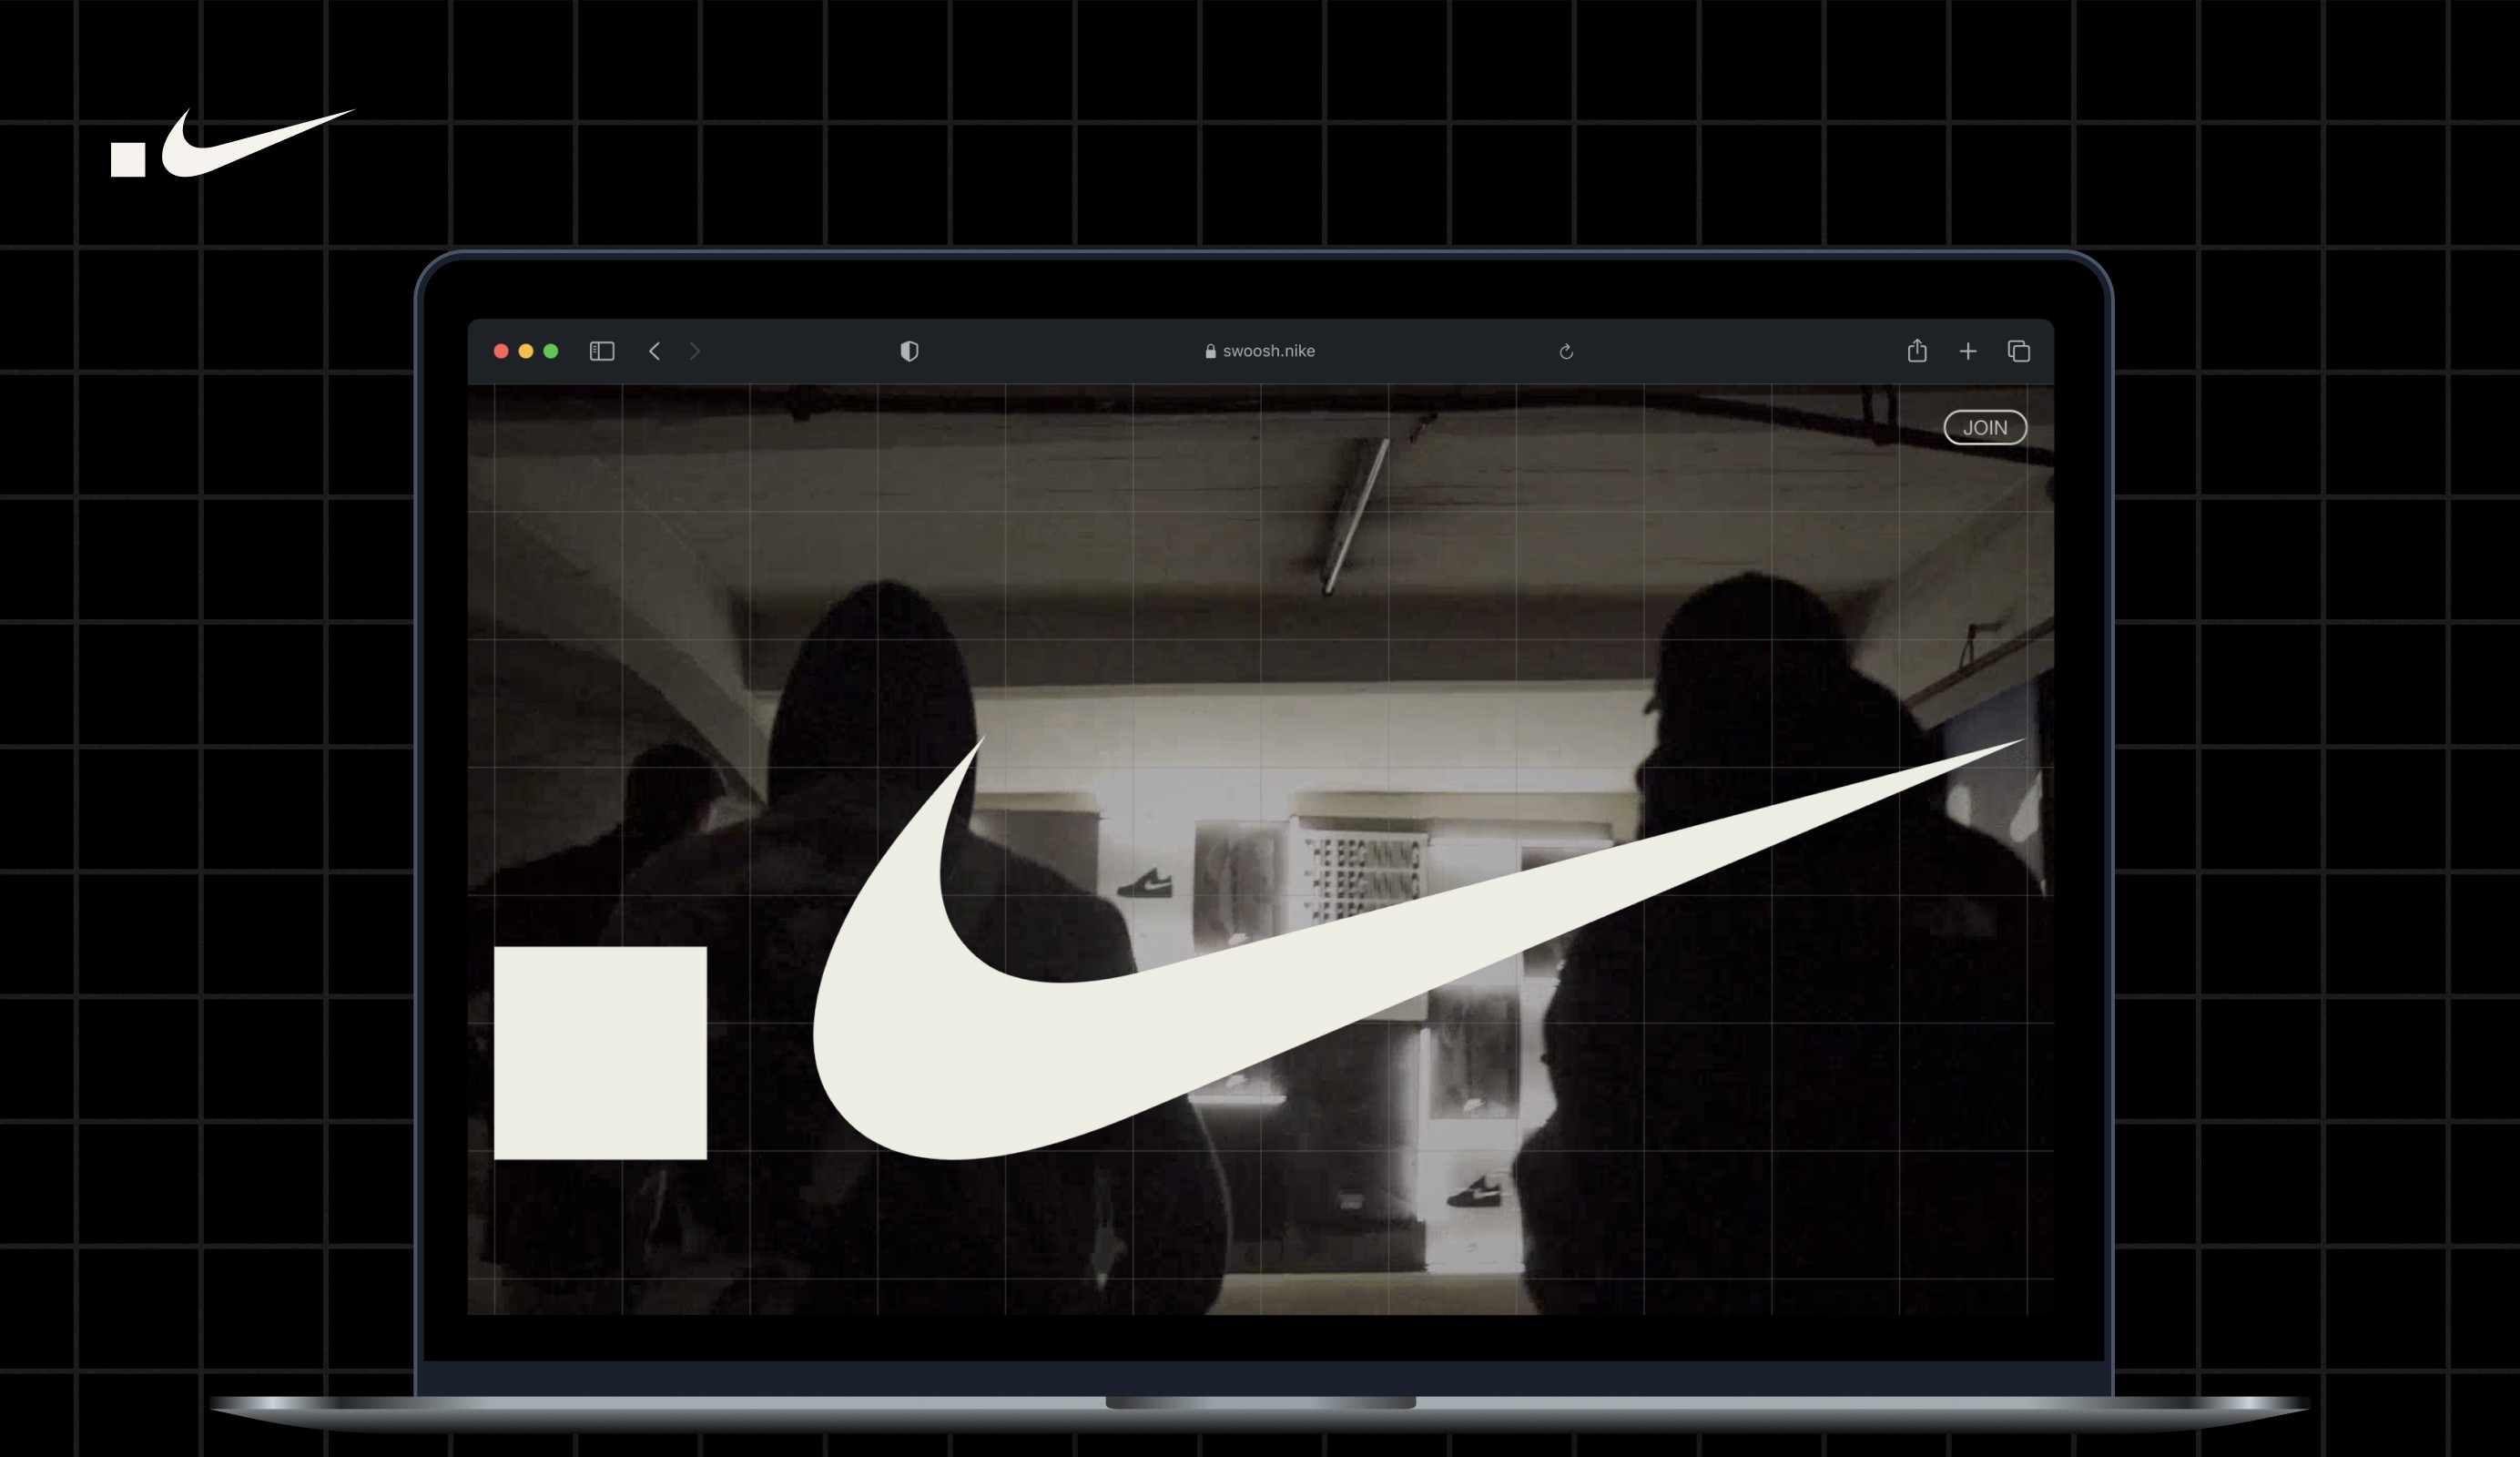 Nike to Open .Swoosh, a Virtual Sneaker and Trading Platform (NYSE:NKE) - Bloomberg